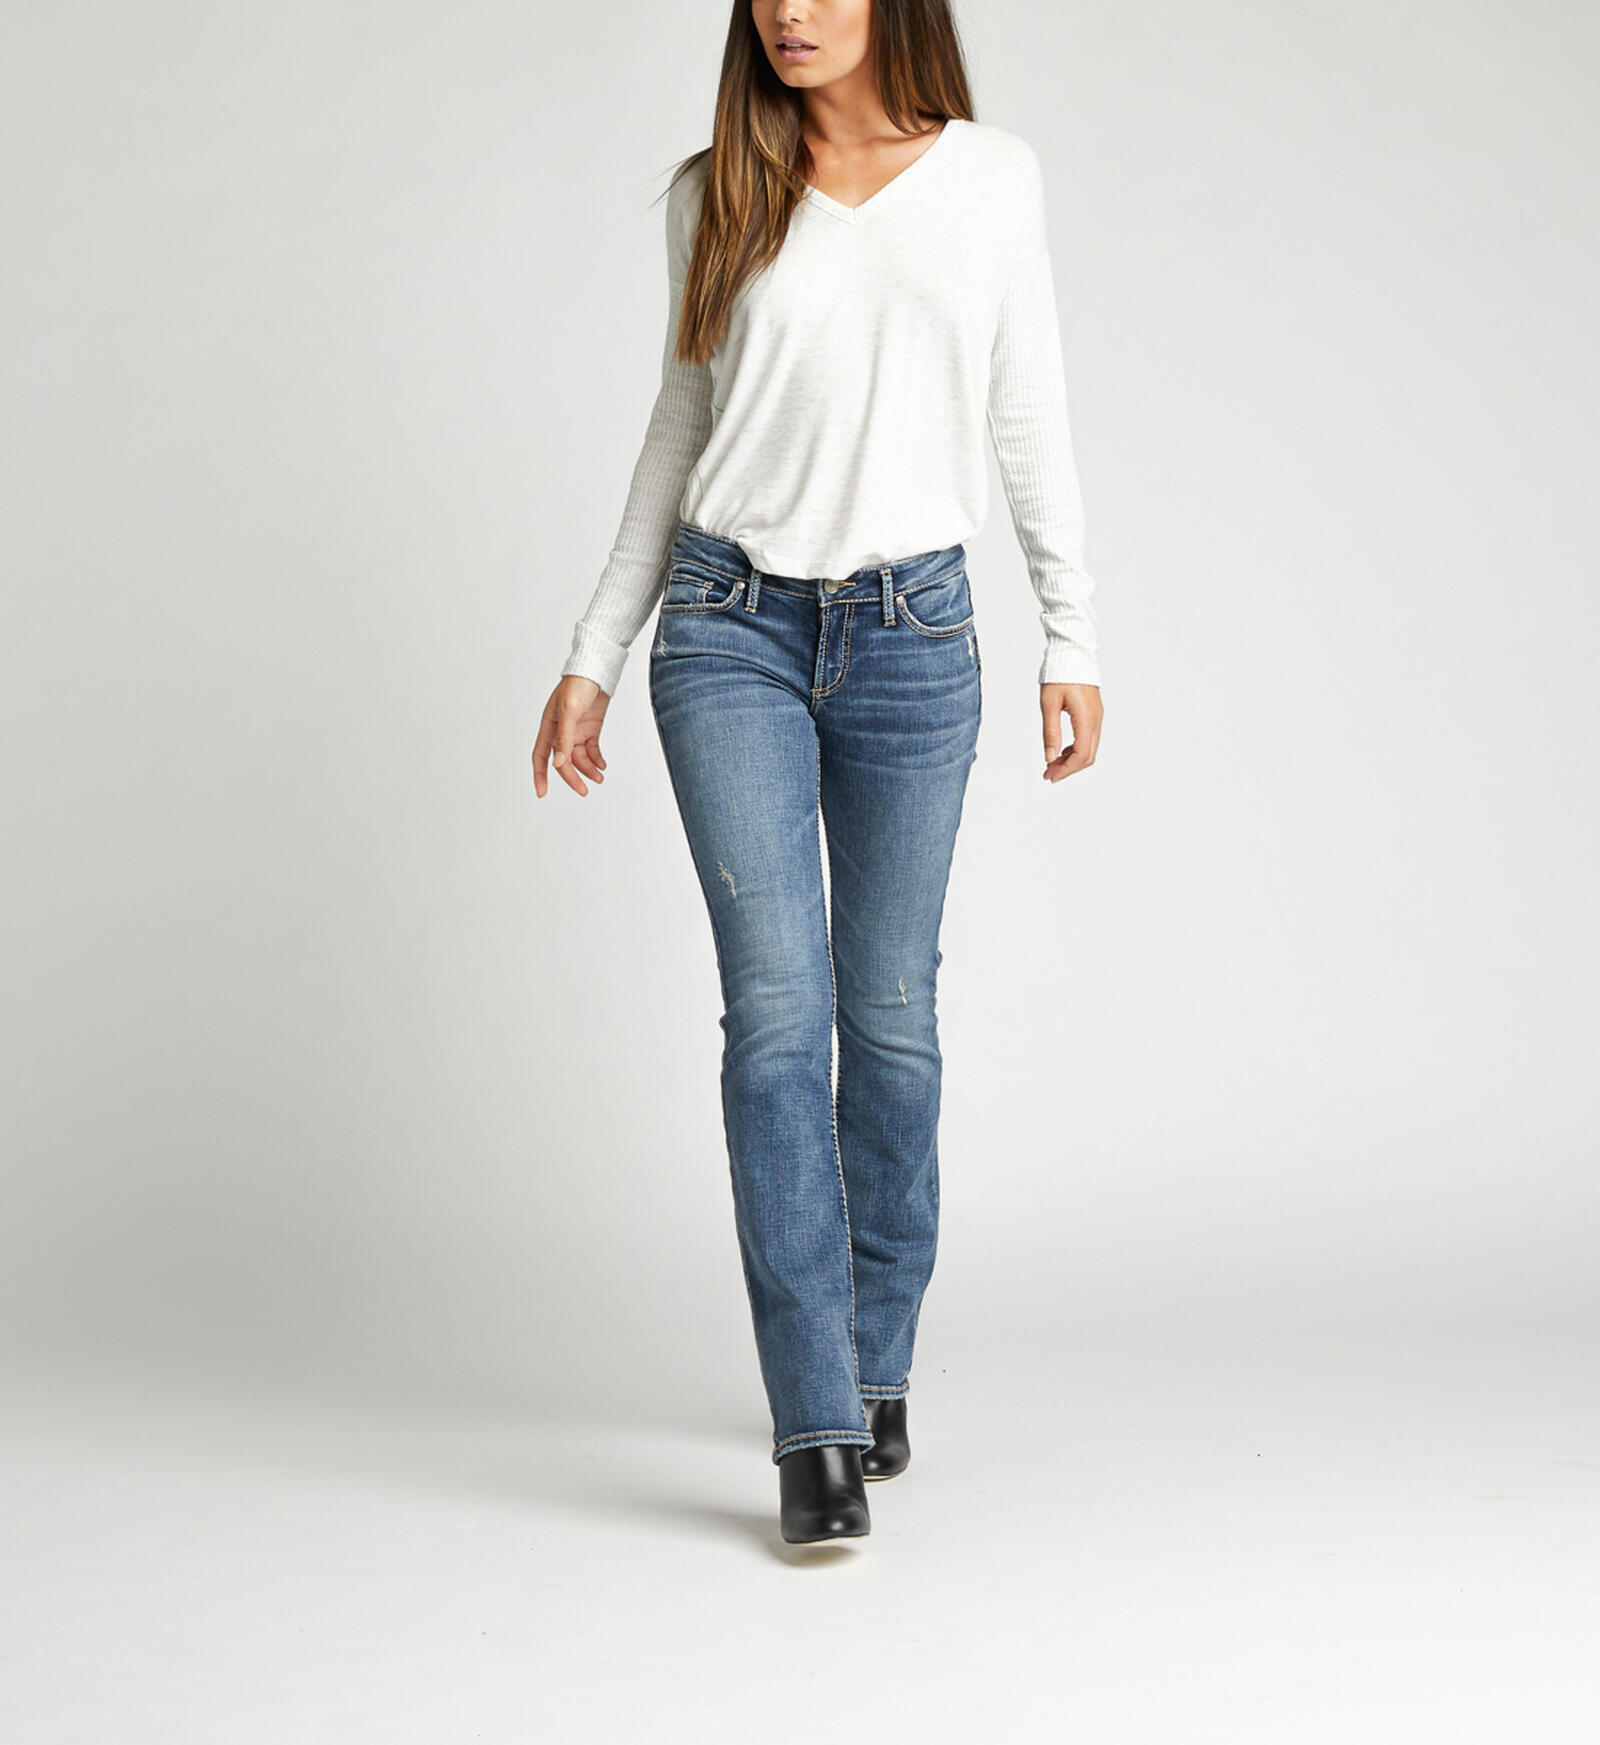 Buy Elyse Mid Rise Slim Bootcut Jeans for CAD 114.00